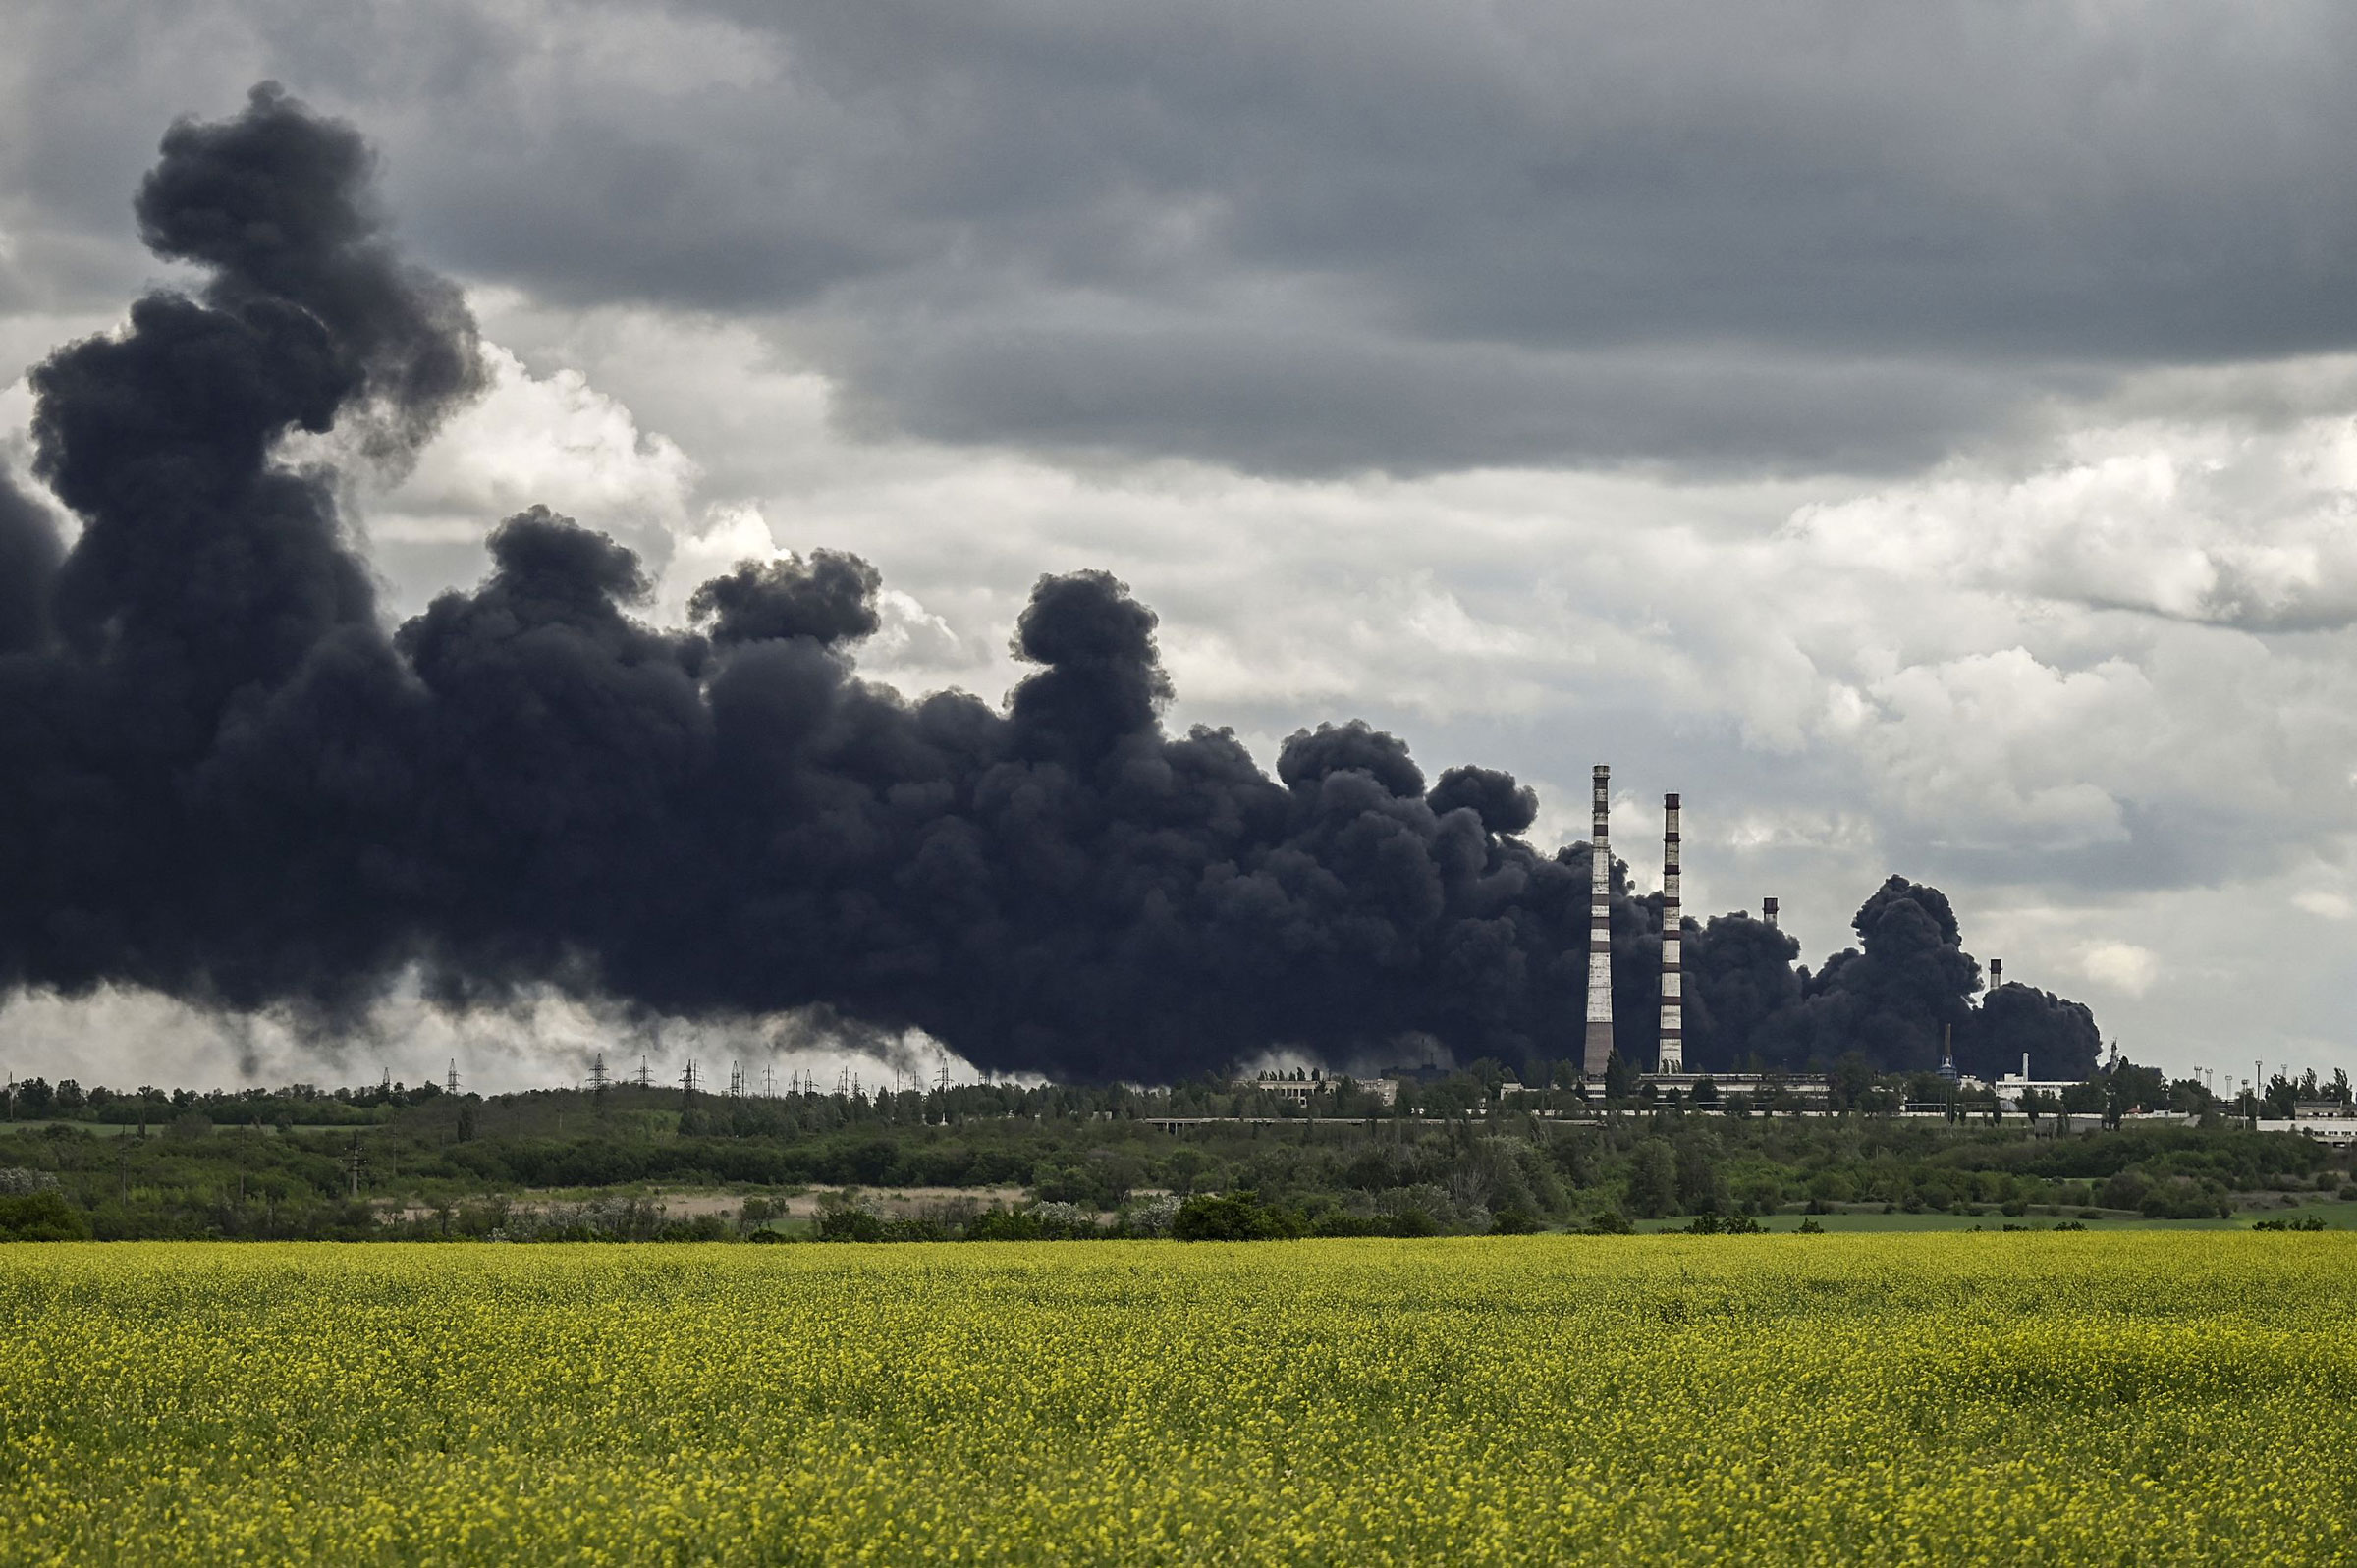 Smoke rises from an oil refinery after an attack outside the city of Lysychansk in the eastern Ukranian region of Donbas, on May 22, 2022, on the 88th day of the Russian invasion of Ukraine. (Aris Messinis—AFP/Getty Images)